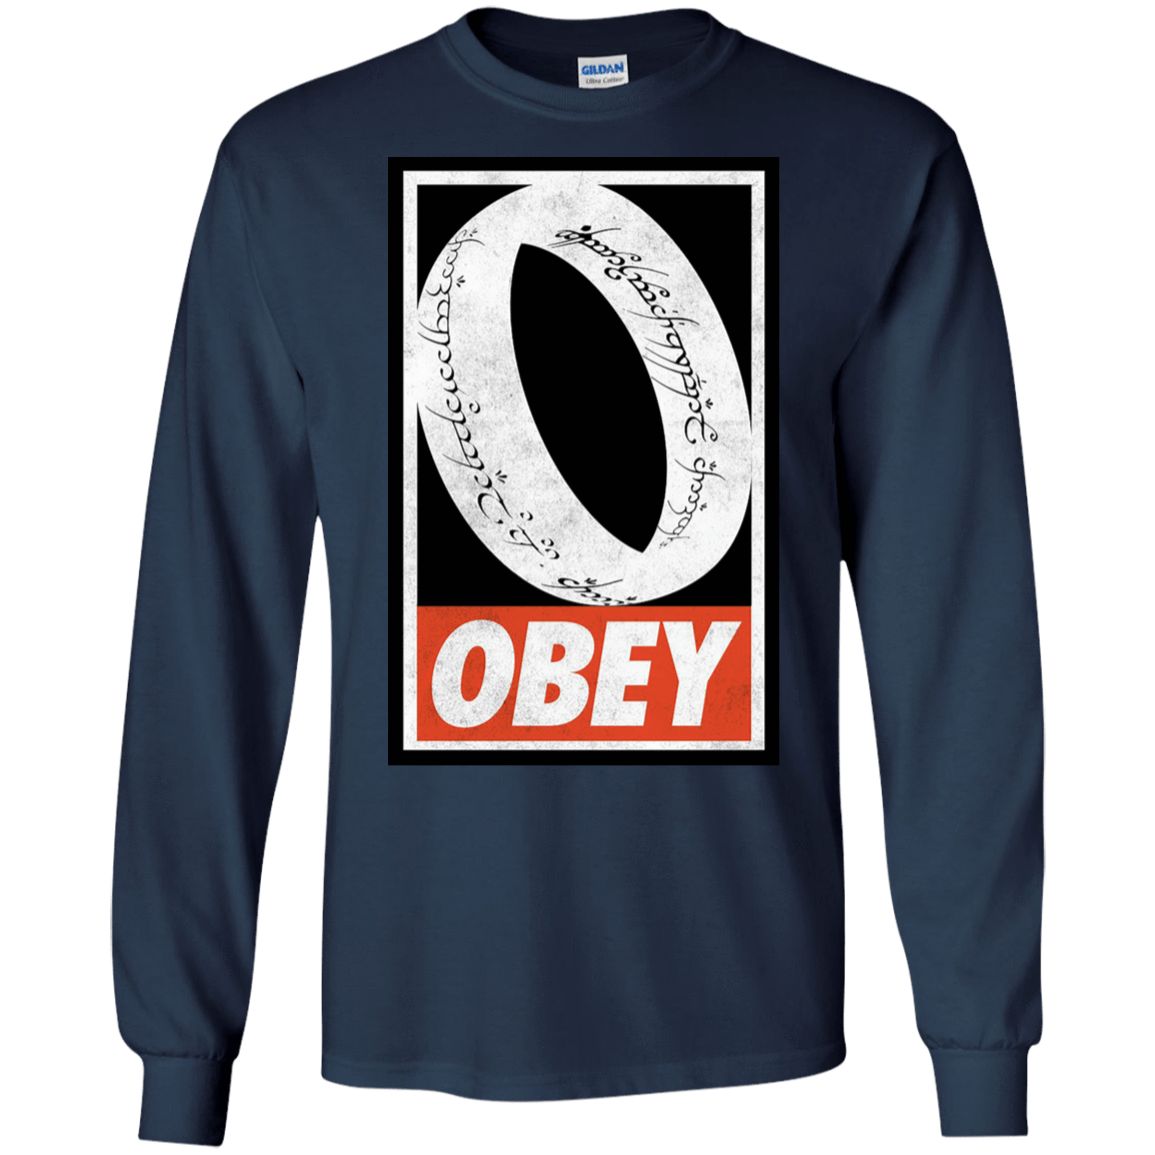 T-Shirts Navy / S Obey One Ring Men's Long Sleeve T-Shirt